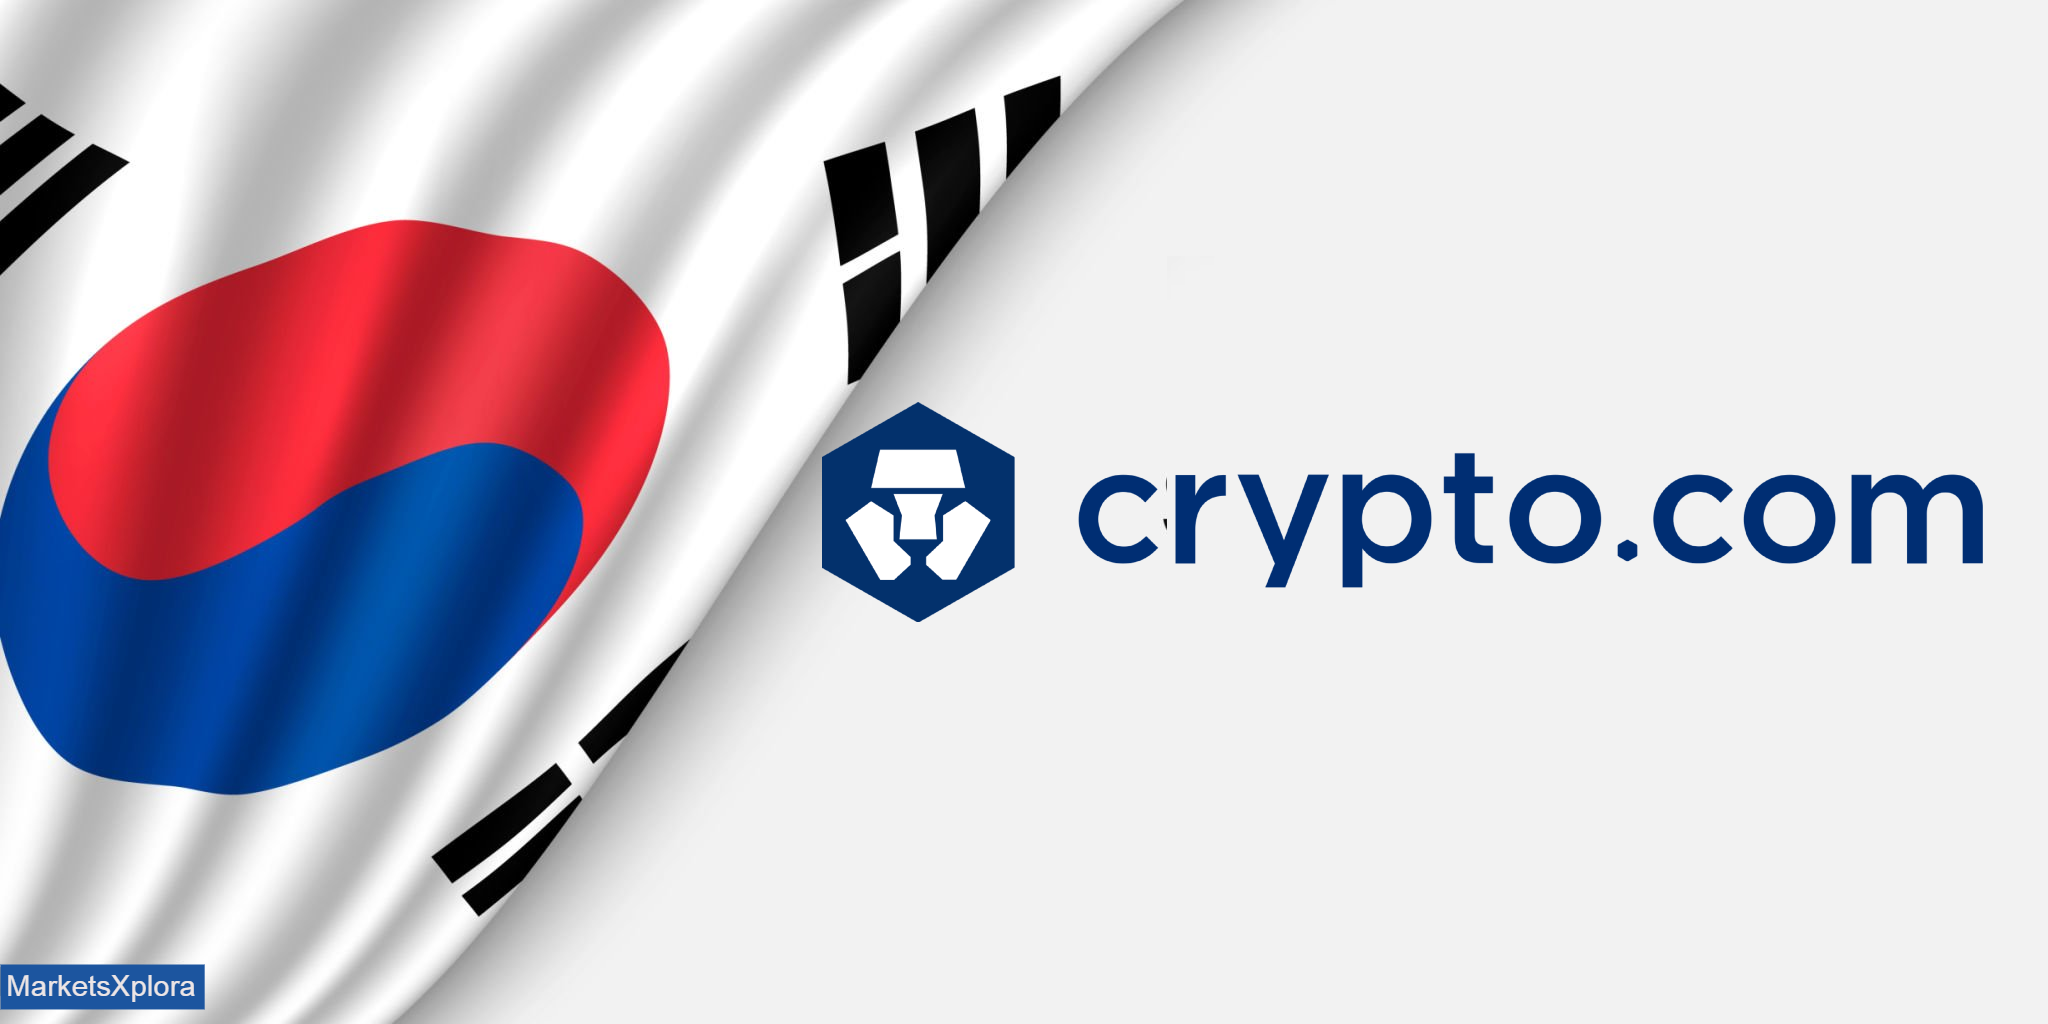 Crypto.com is launching its retail cryptocurrency trading platform in South Korea on April 29, taking over operations of licensed local exchange OK-BIT as it targets the booming Korean market.